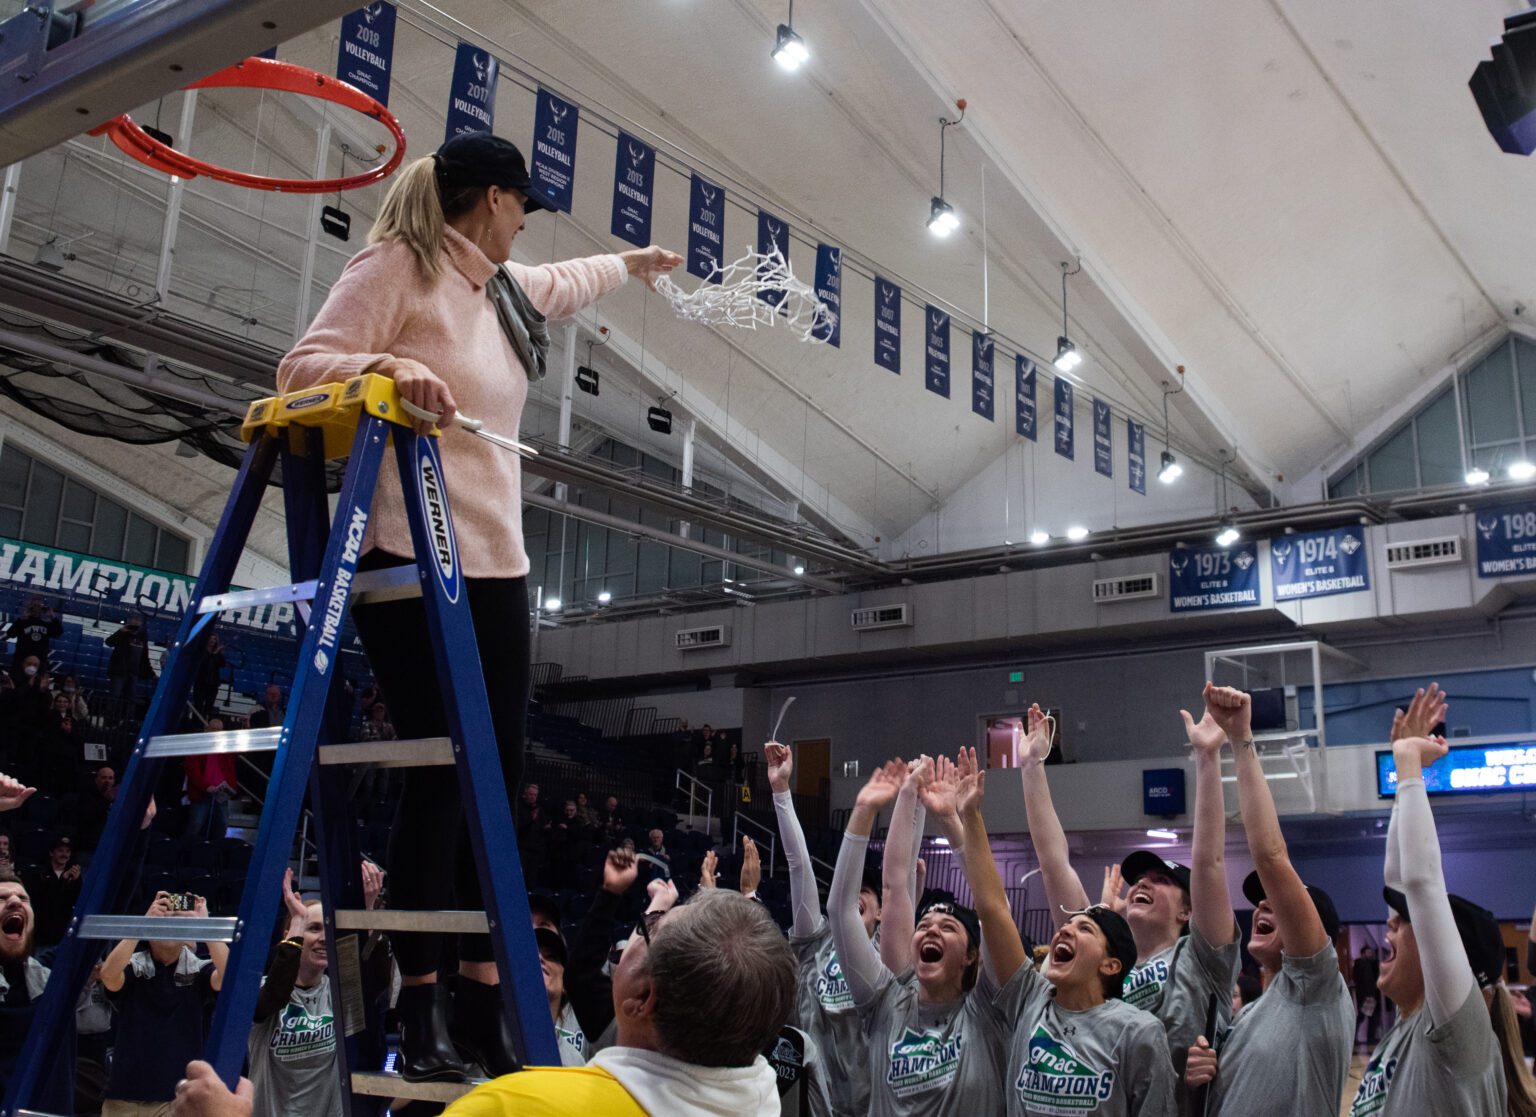 Western Washington University head women's basketball coach Carmen Dolfo cuts the net March 4 after the Vikings defeated Montana State University Billings 76-71 to clinch the Great Northwest Athletic Conference championship at Carver Gymnasium. Dolfo leads the Vikings into NCAA Division II Tournament play Friday in Carson